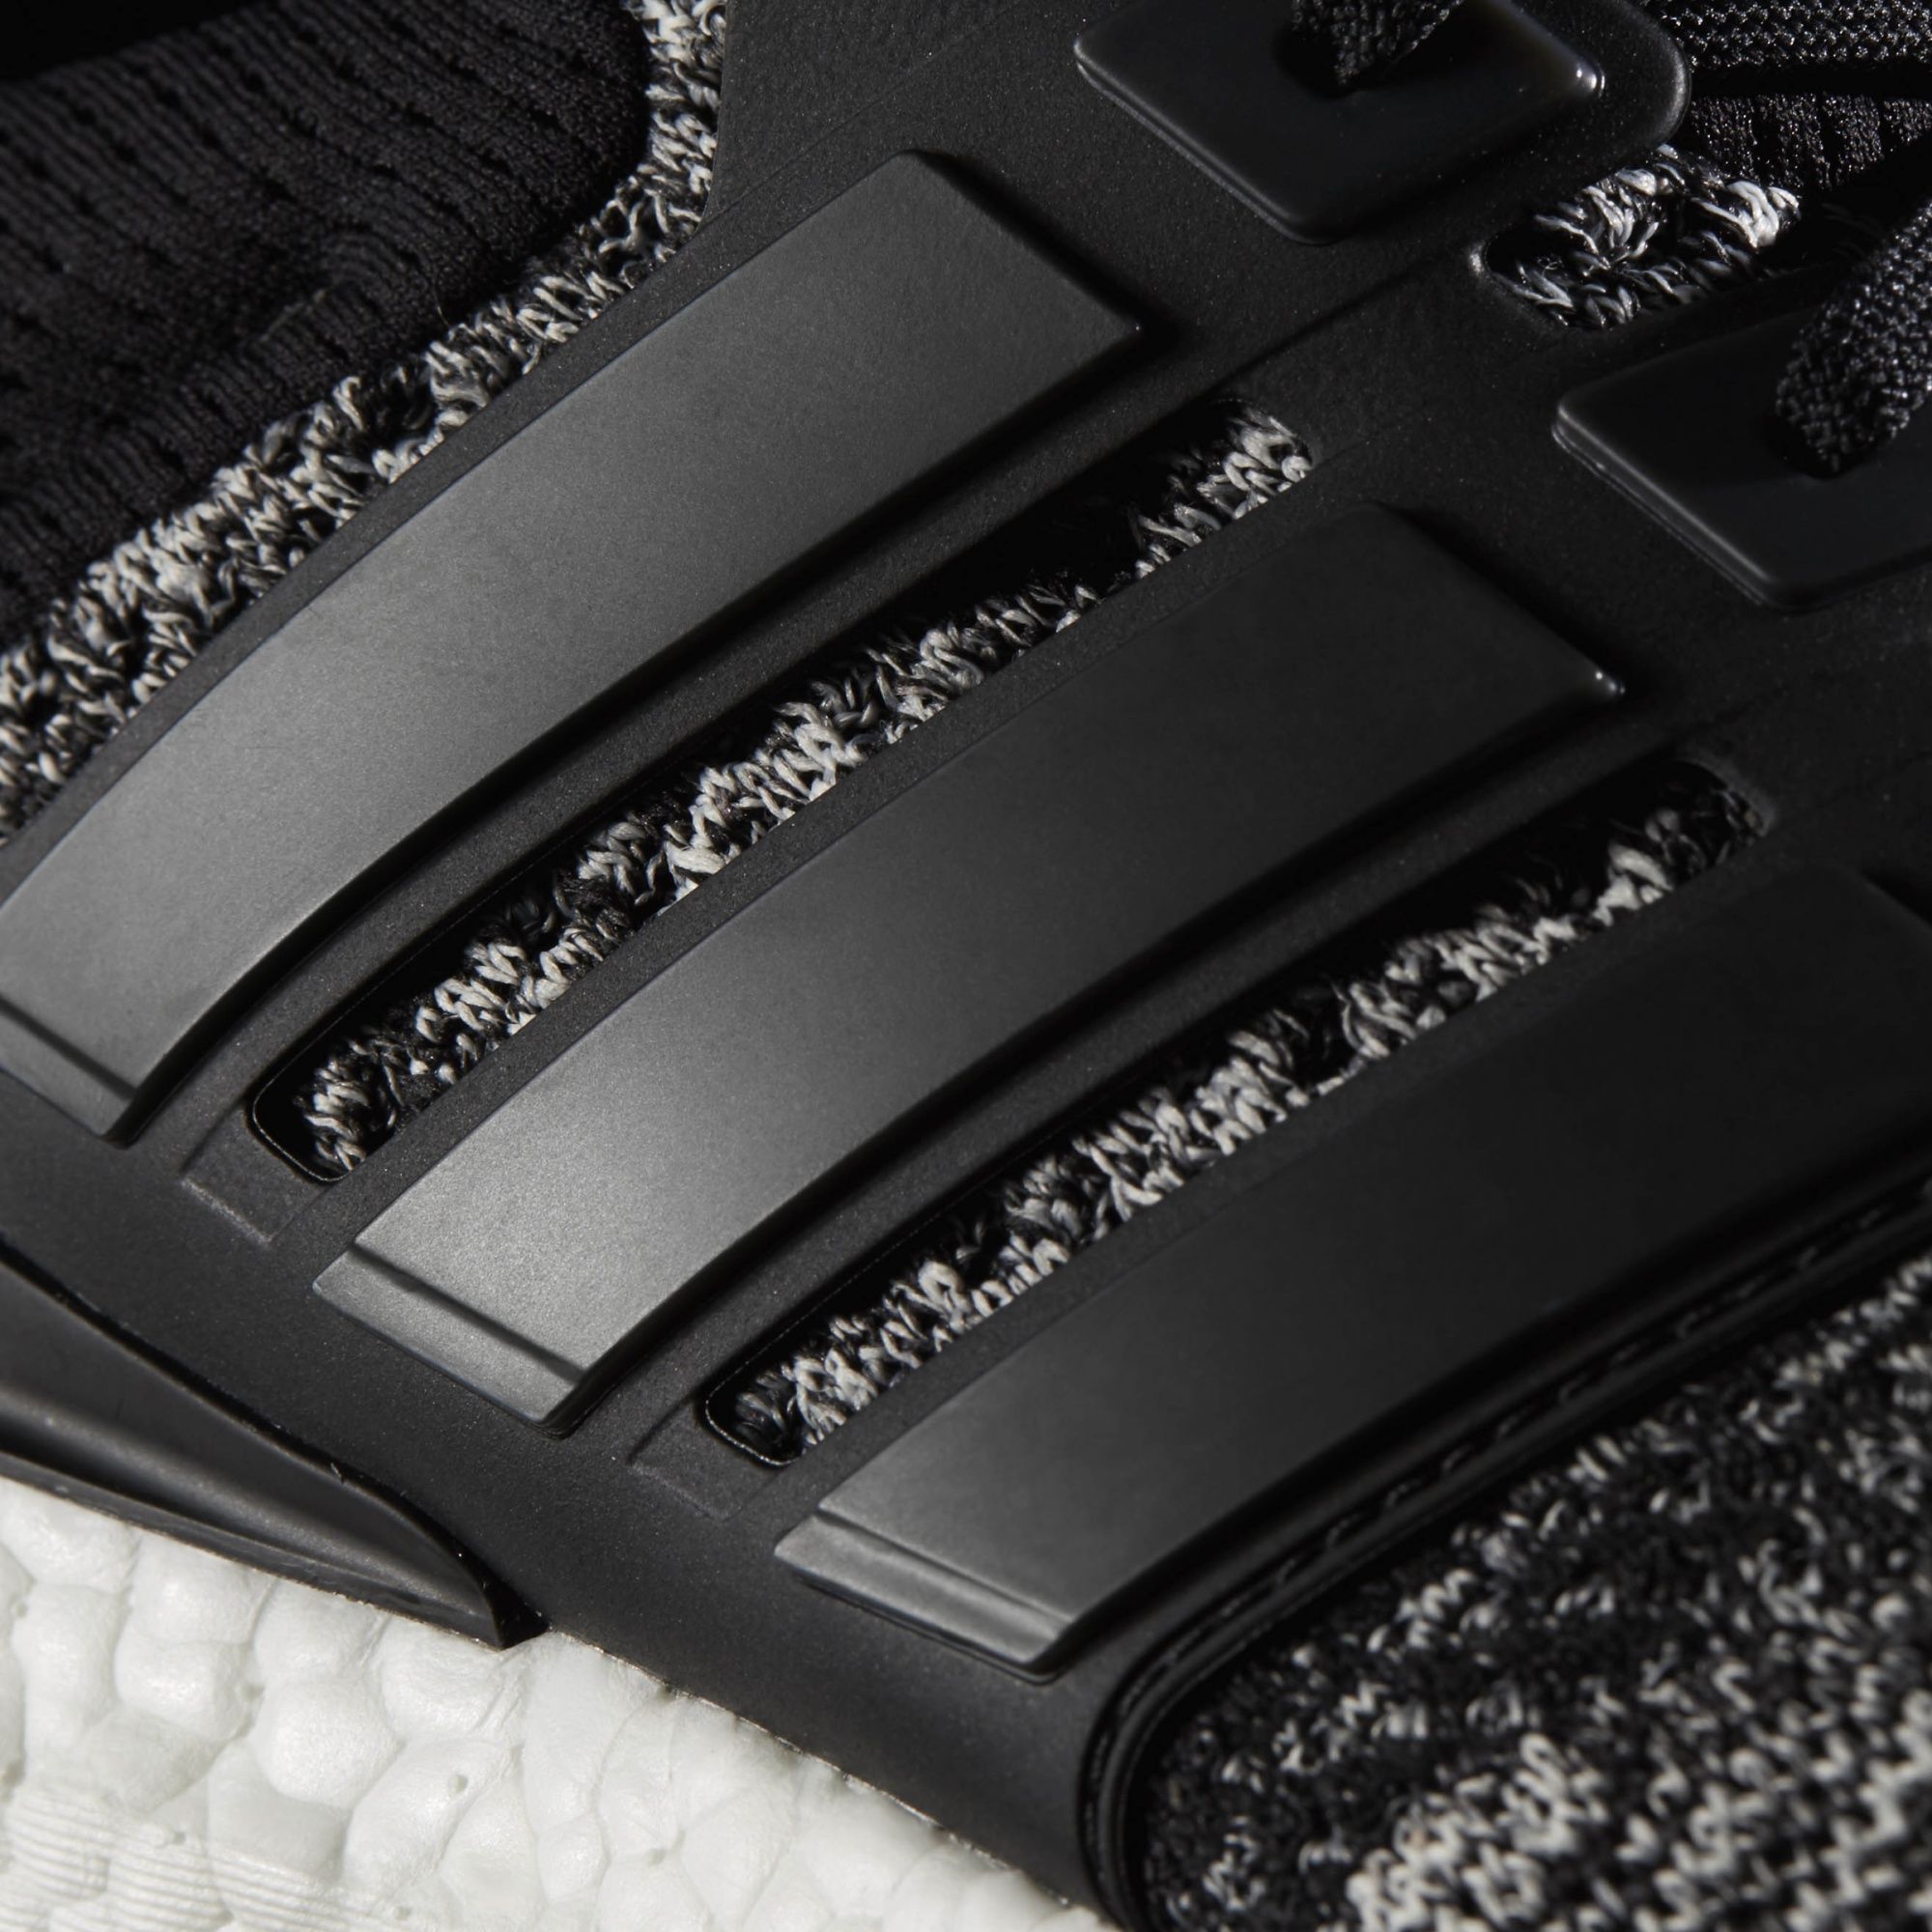 Reigning Champ Adidas Ultra Boost B39254 Cage